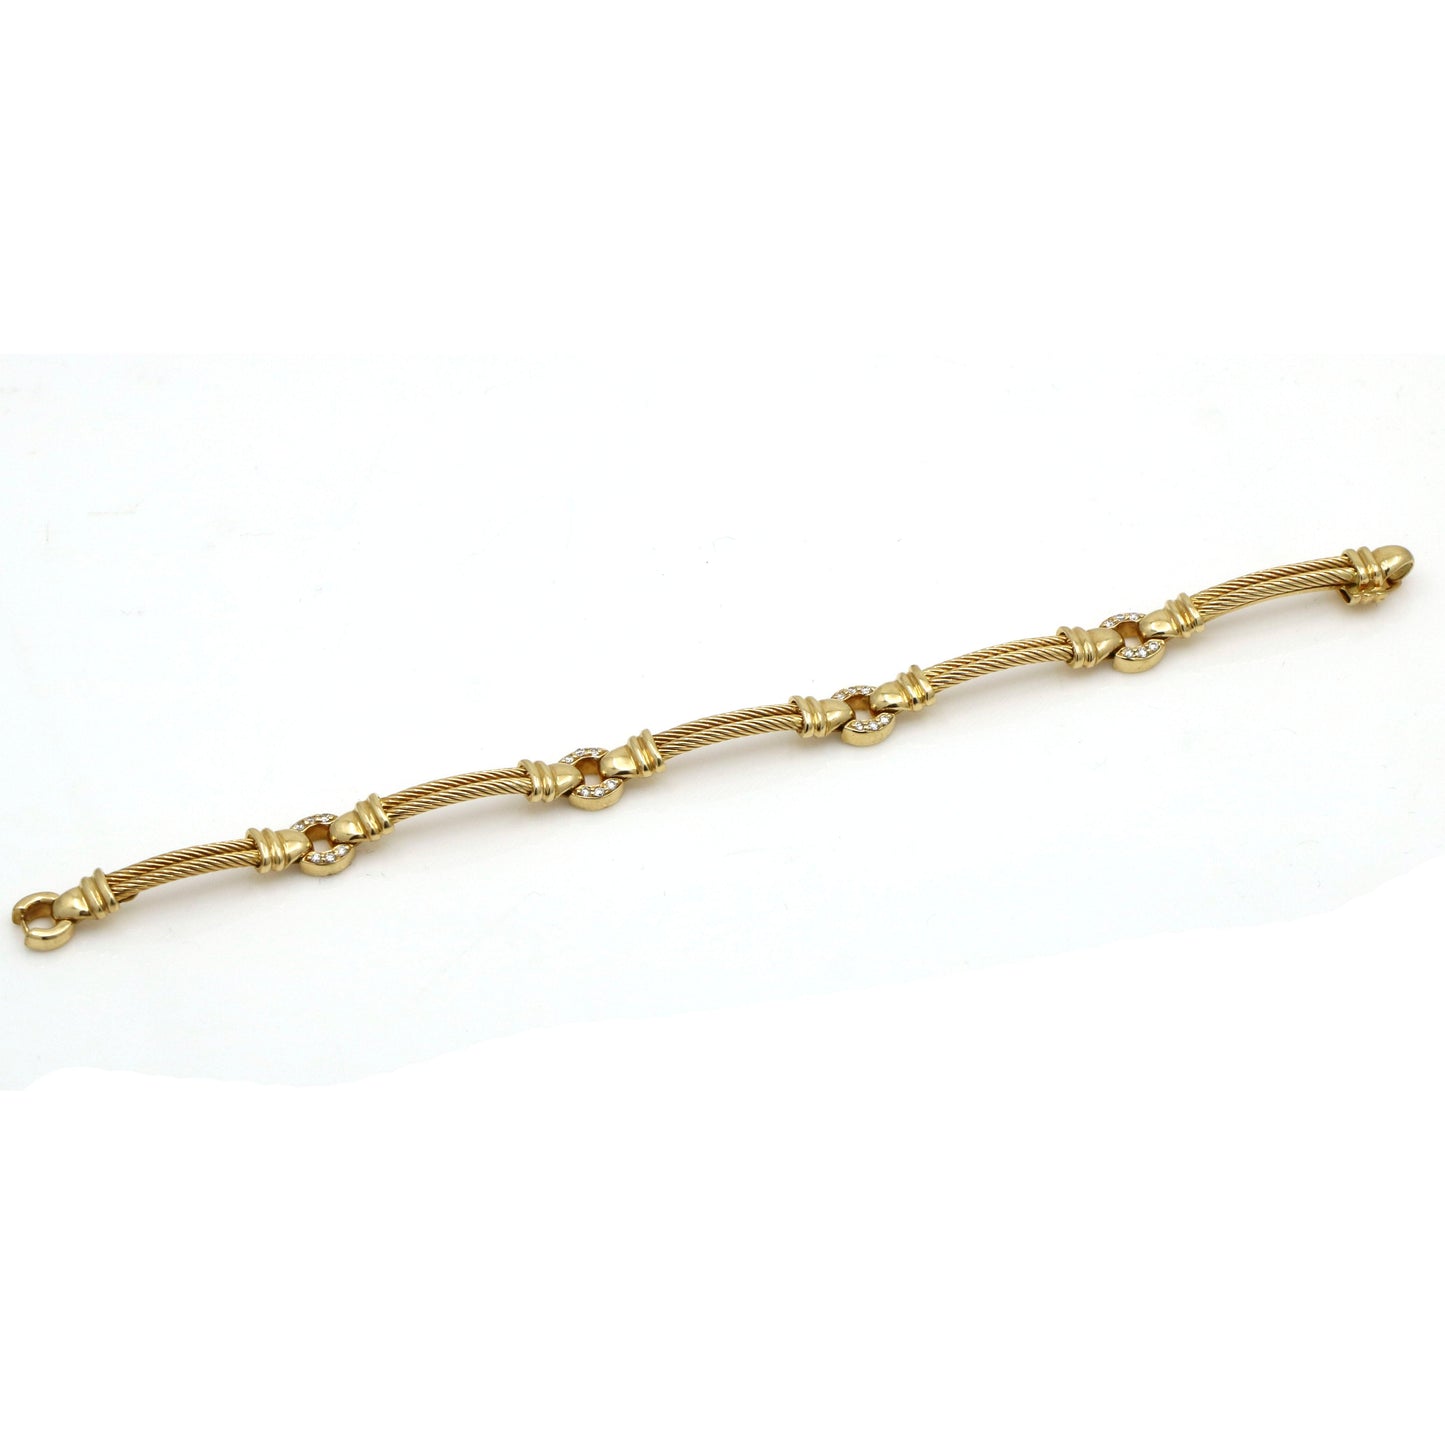 Philippe Charriol Diamond Cable Link Bracelet in 18k Yellow Gold - 31 Jewels Inc.